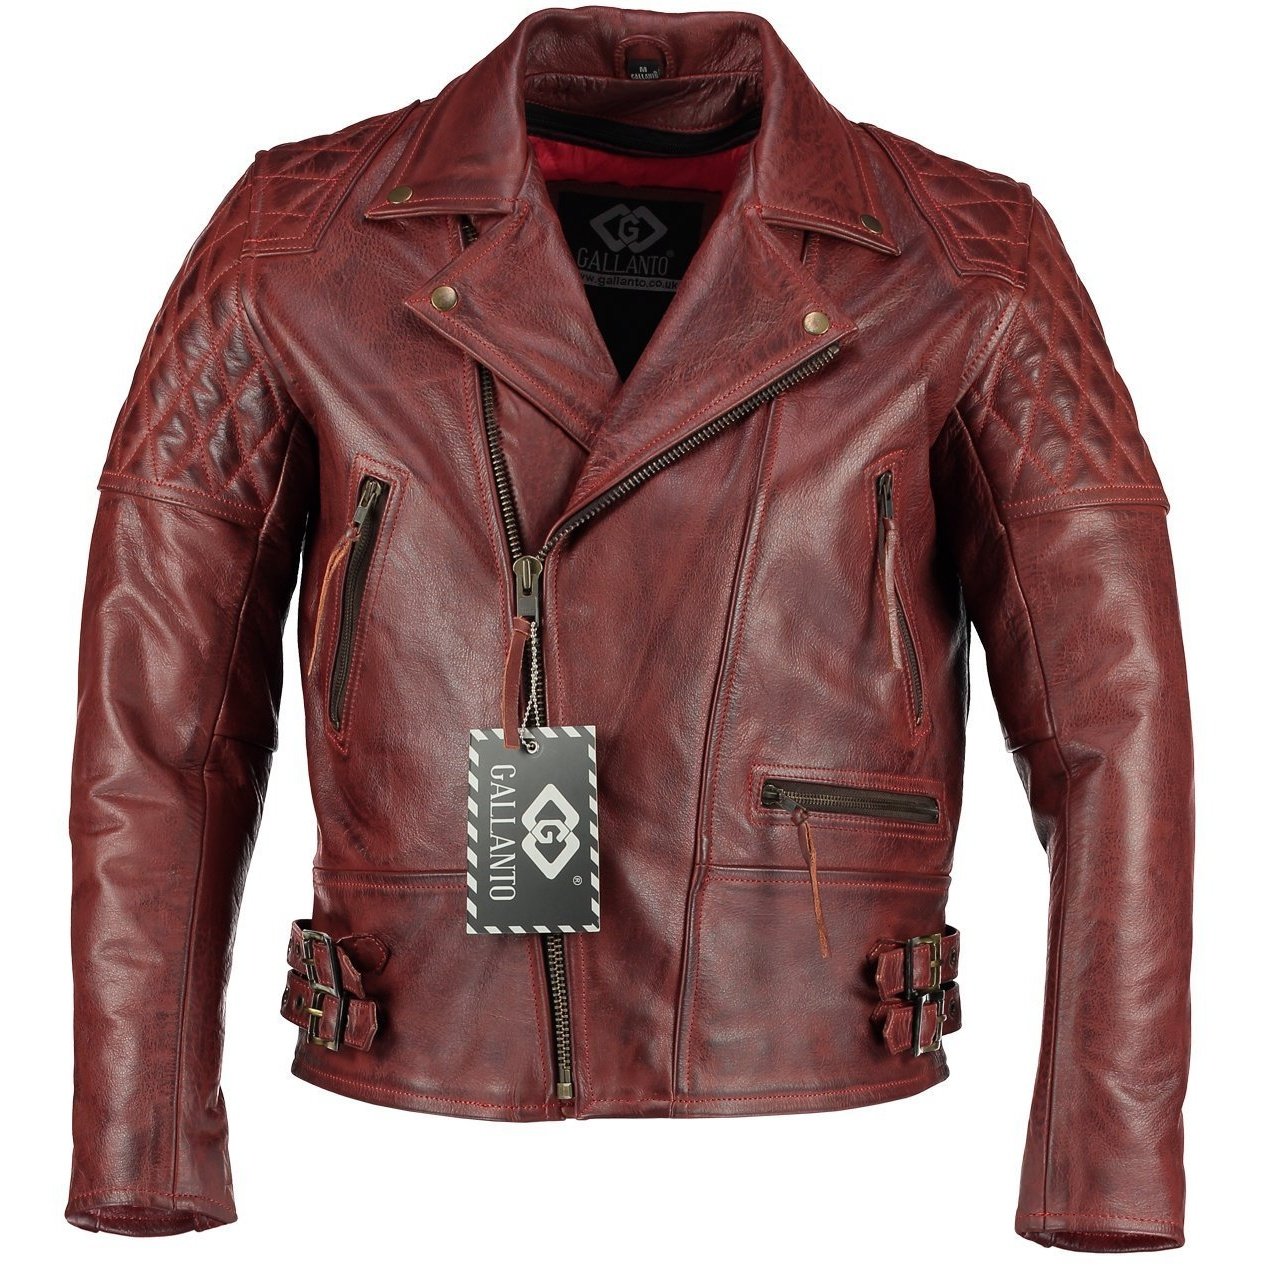 Vintage Red Classic Diamond Mens Leather Jacket – Mens Jackets, Women Motorcycle Jacket, Pant, Leather Gloves